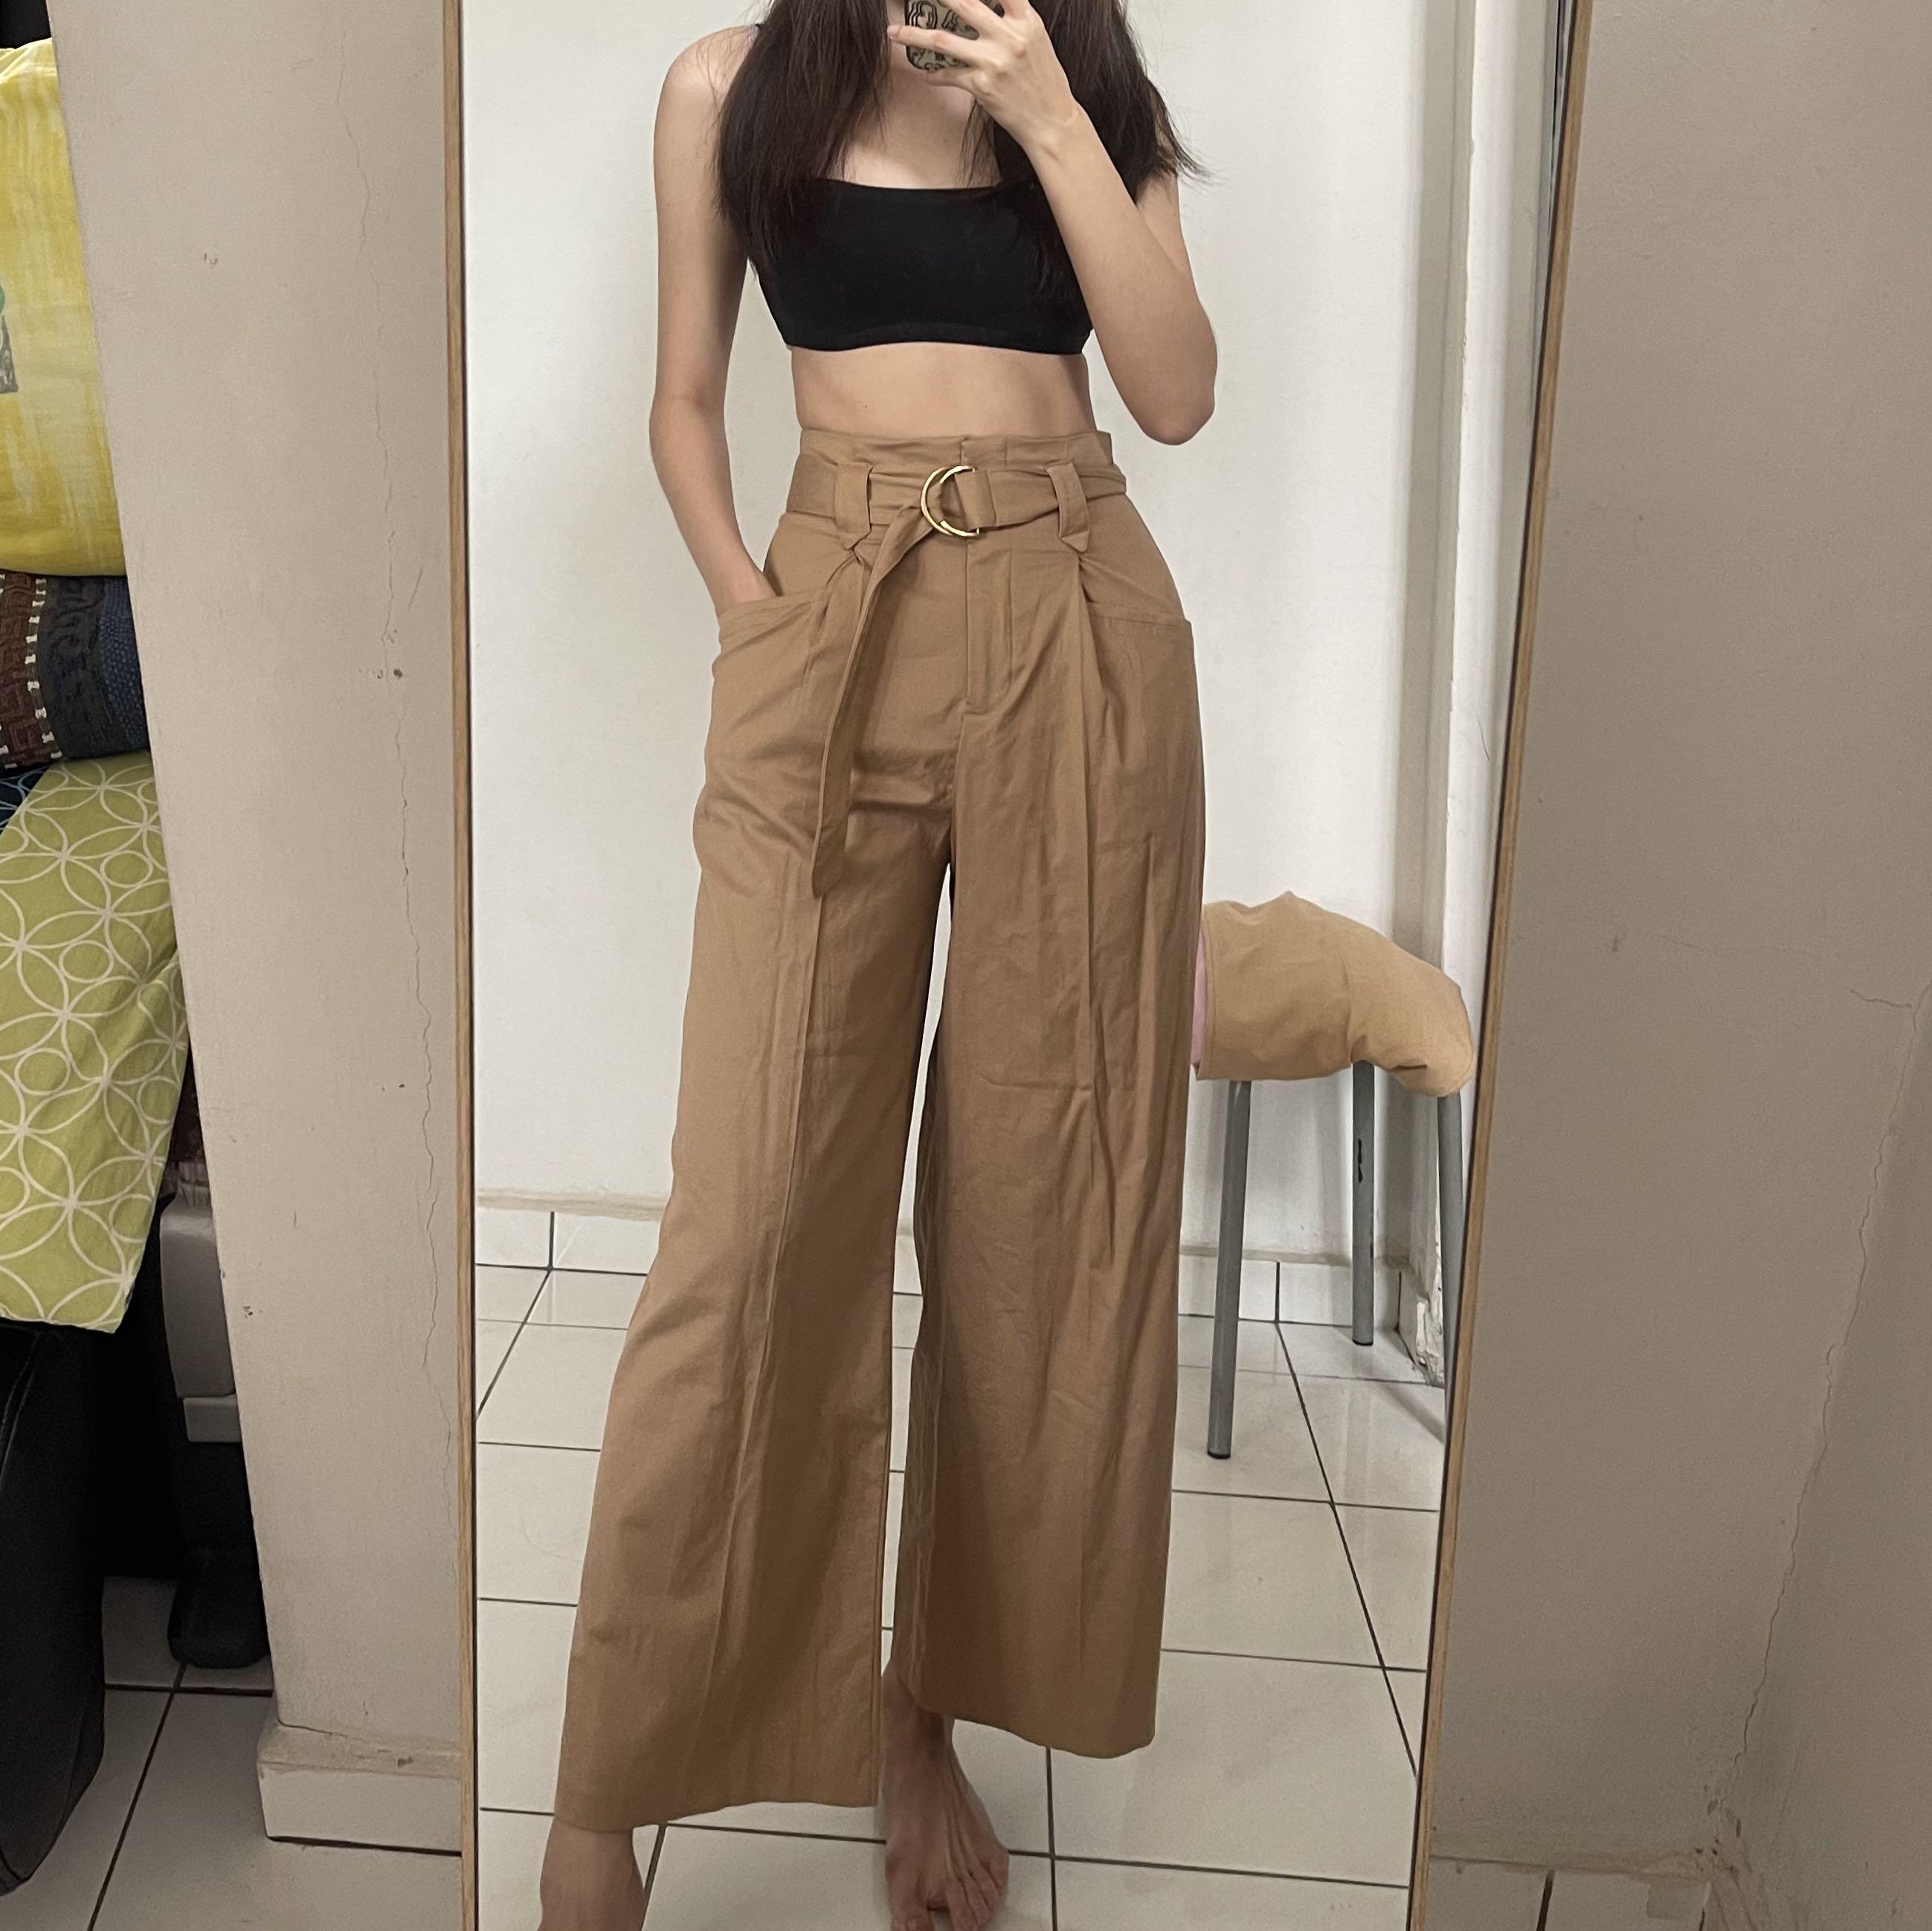 Zara high waisted trousers w belt, Women's Fashion, Bottoms, Other Bottoms  on Carousell